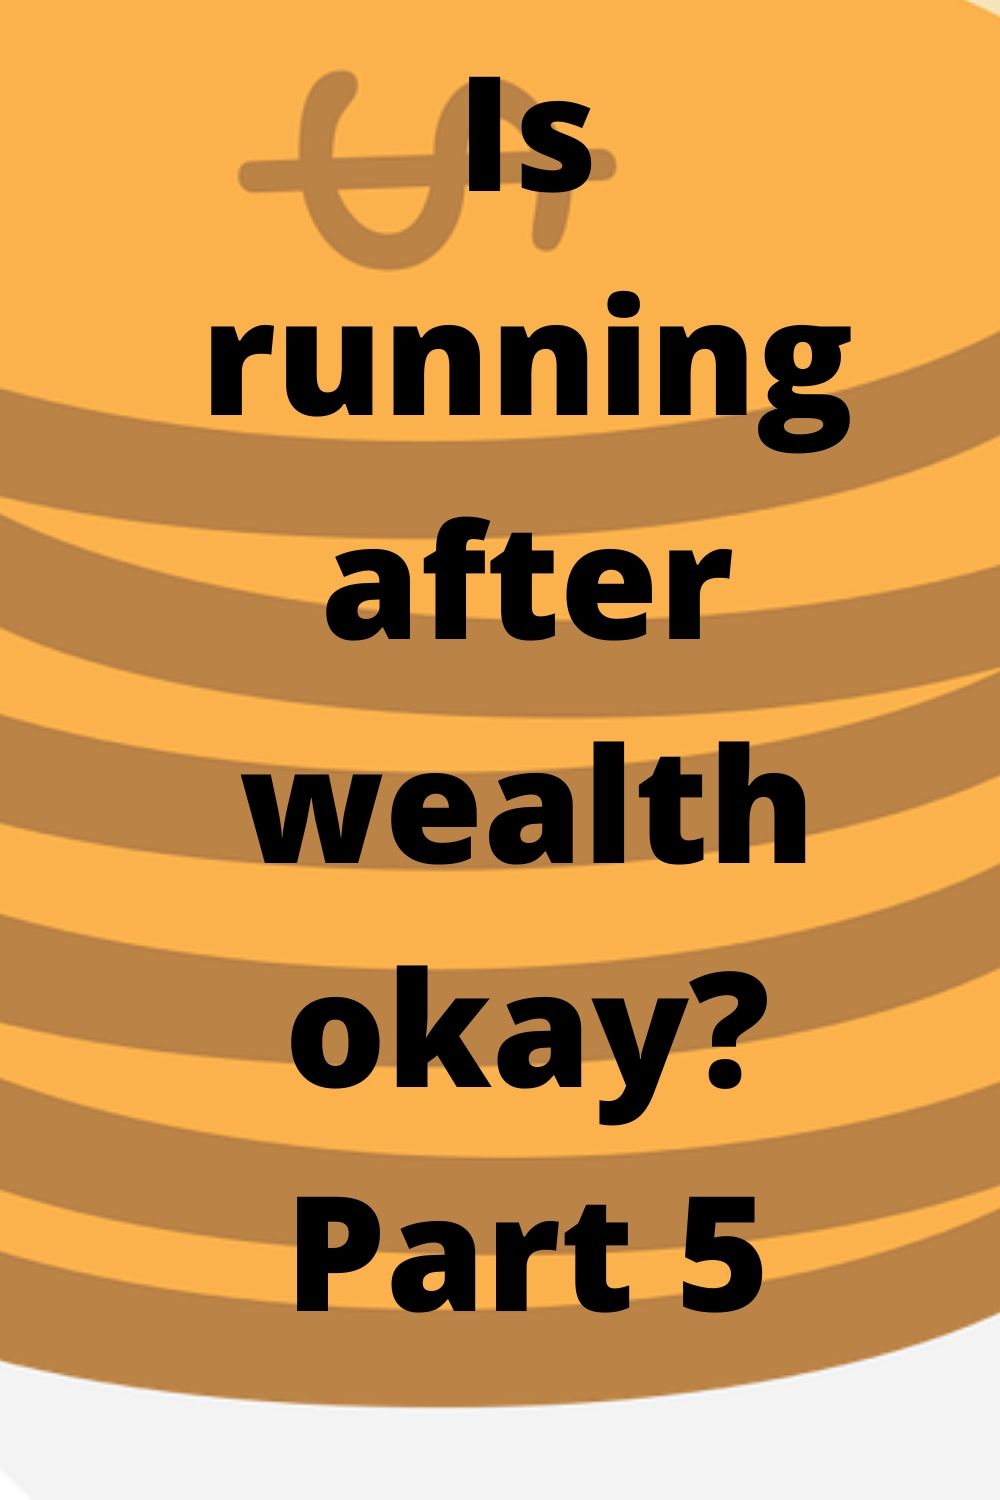 Wealth: Is running after wealth okay? Part 5